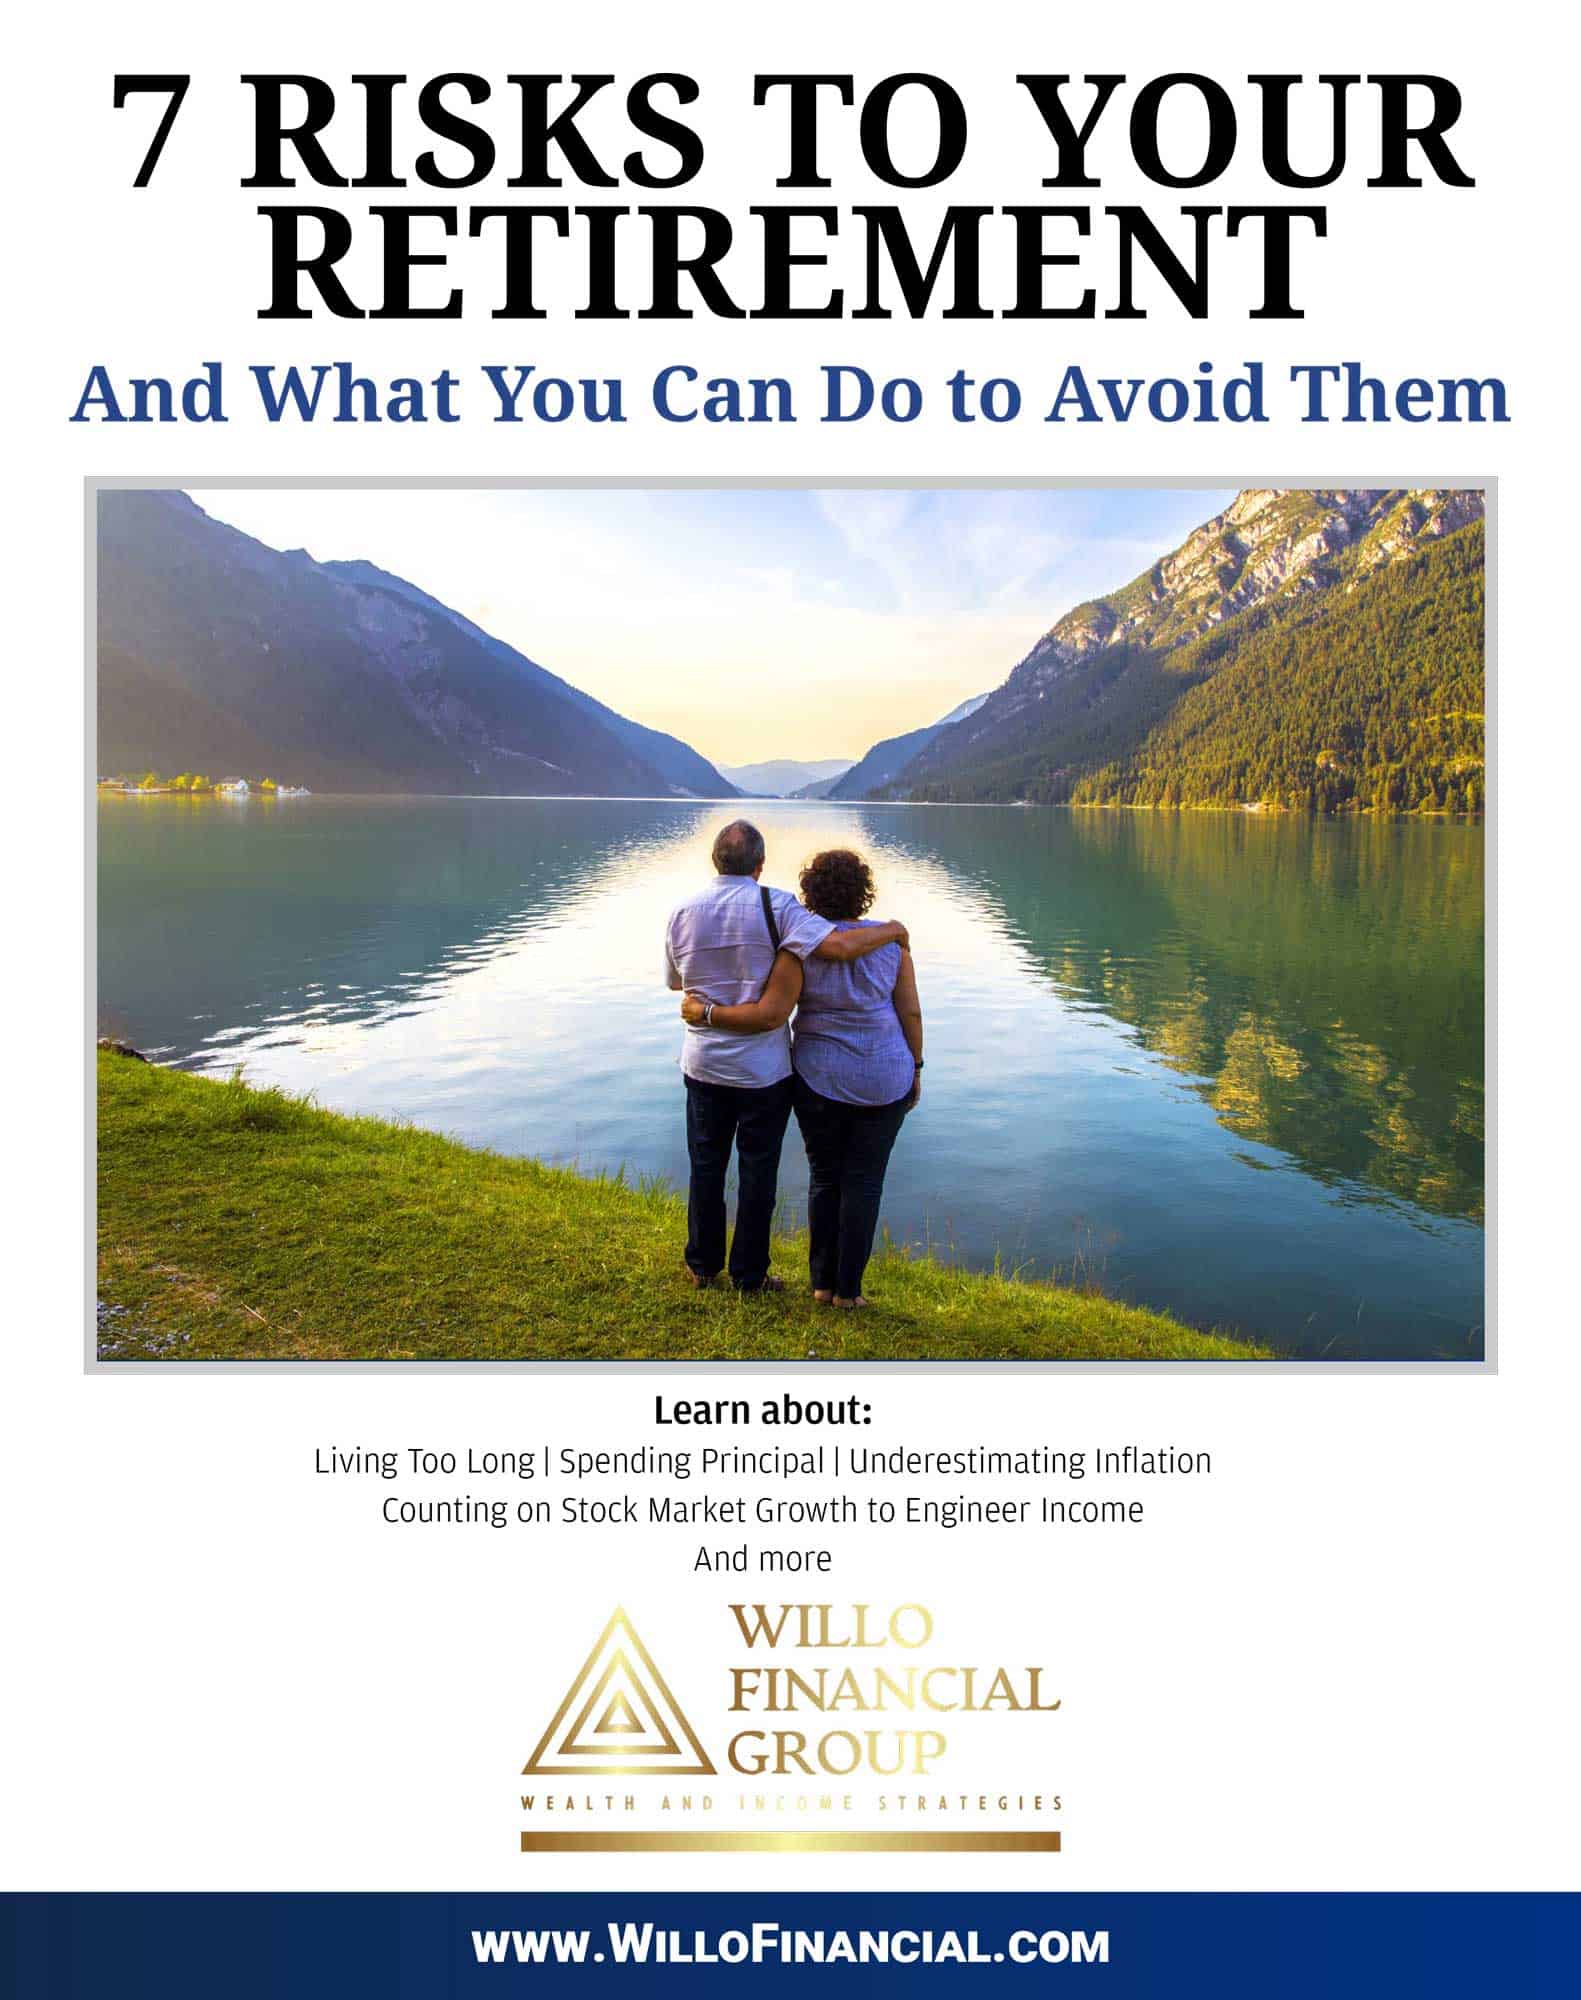 7 Risks to Your Retirement